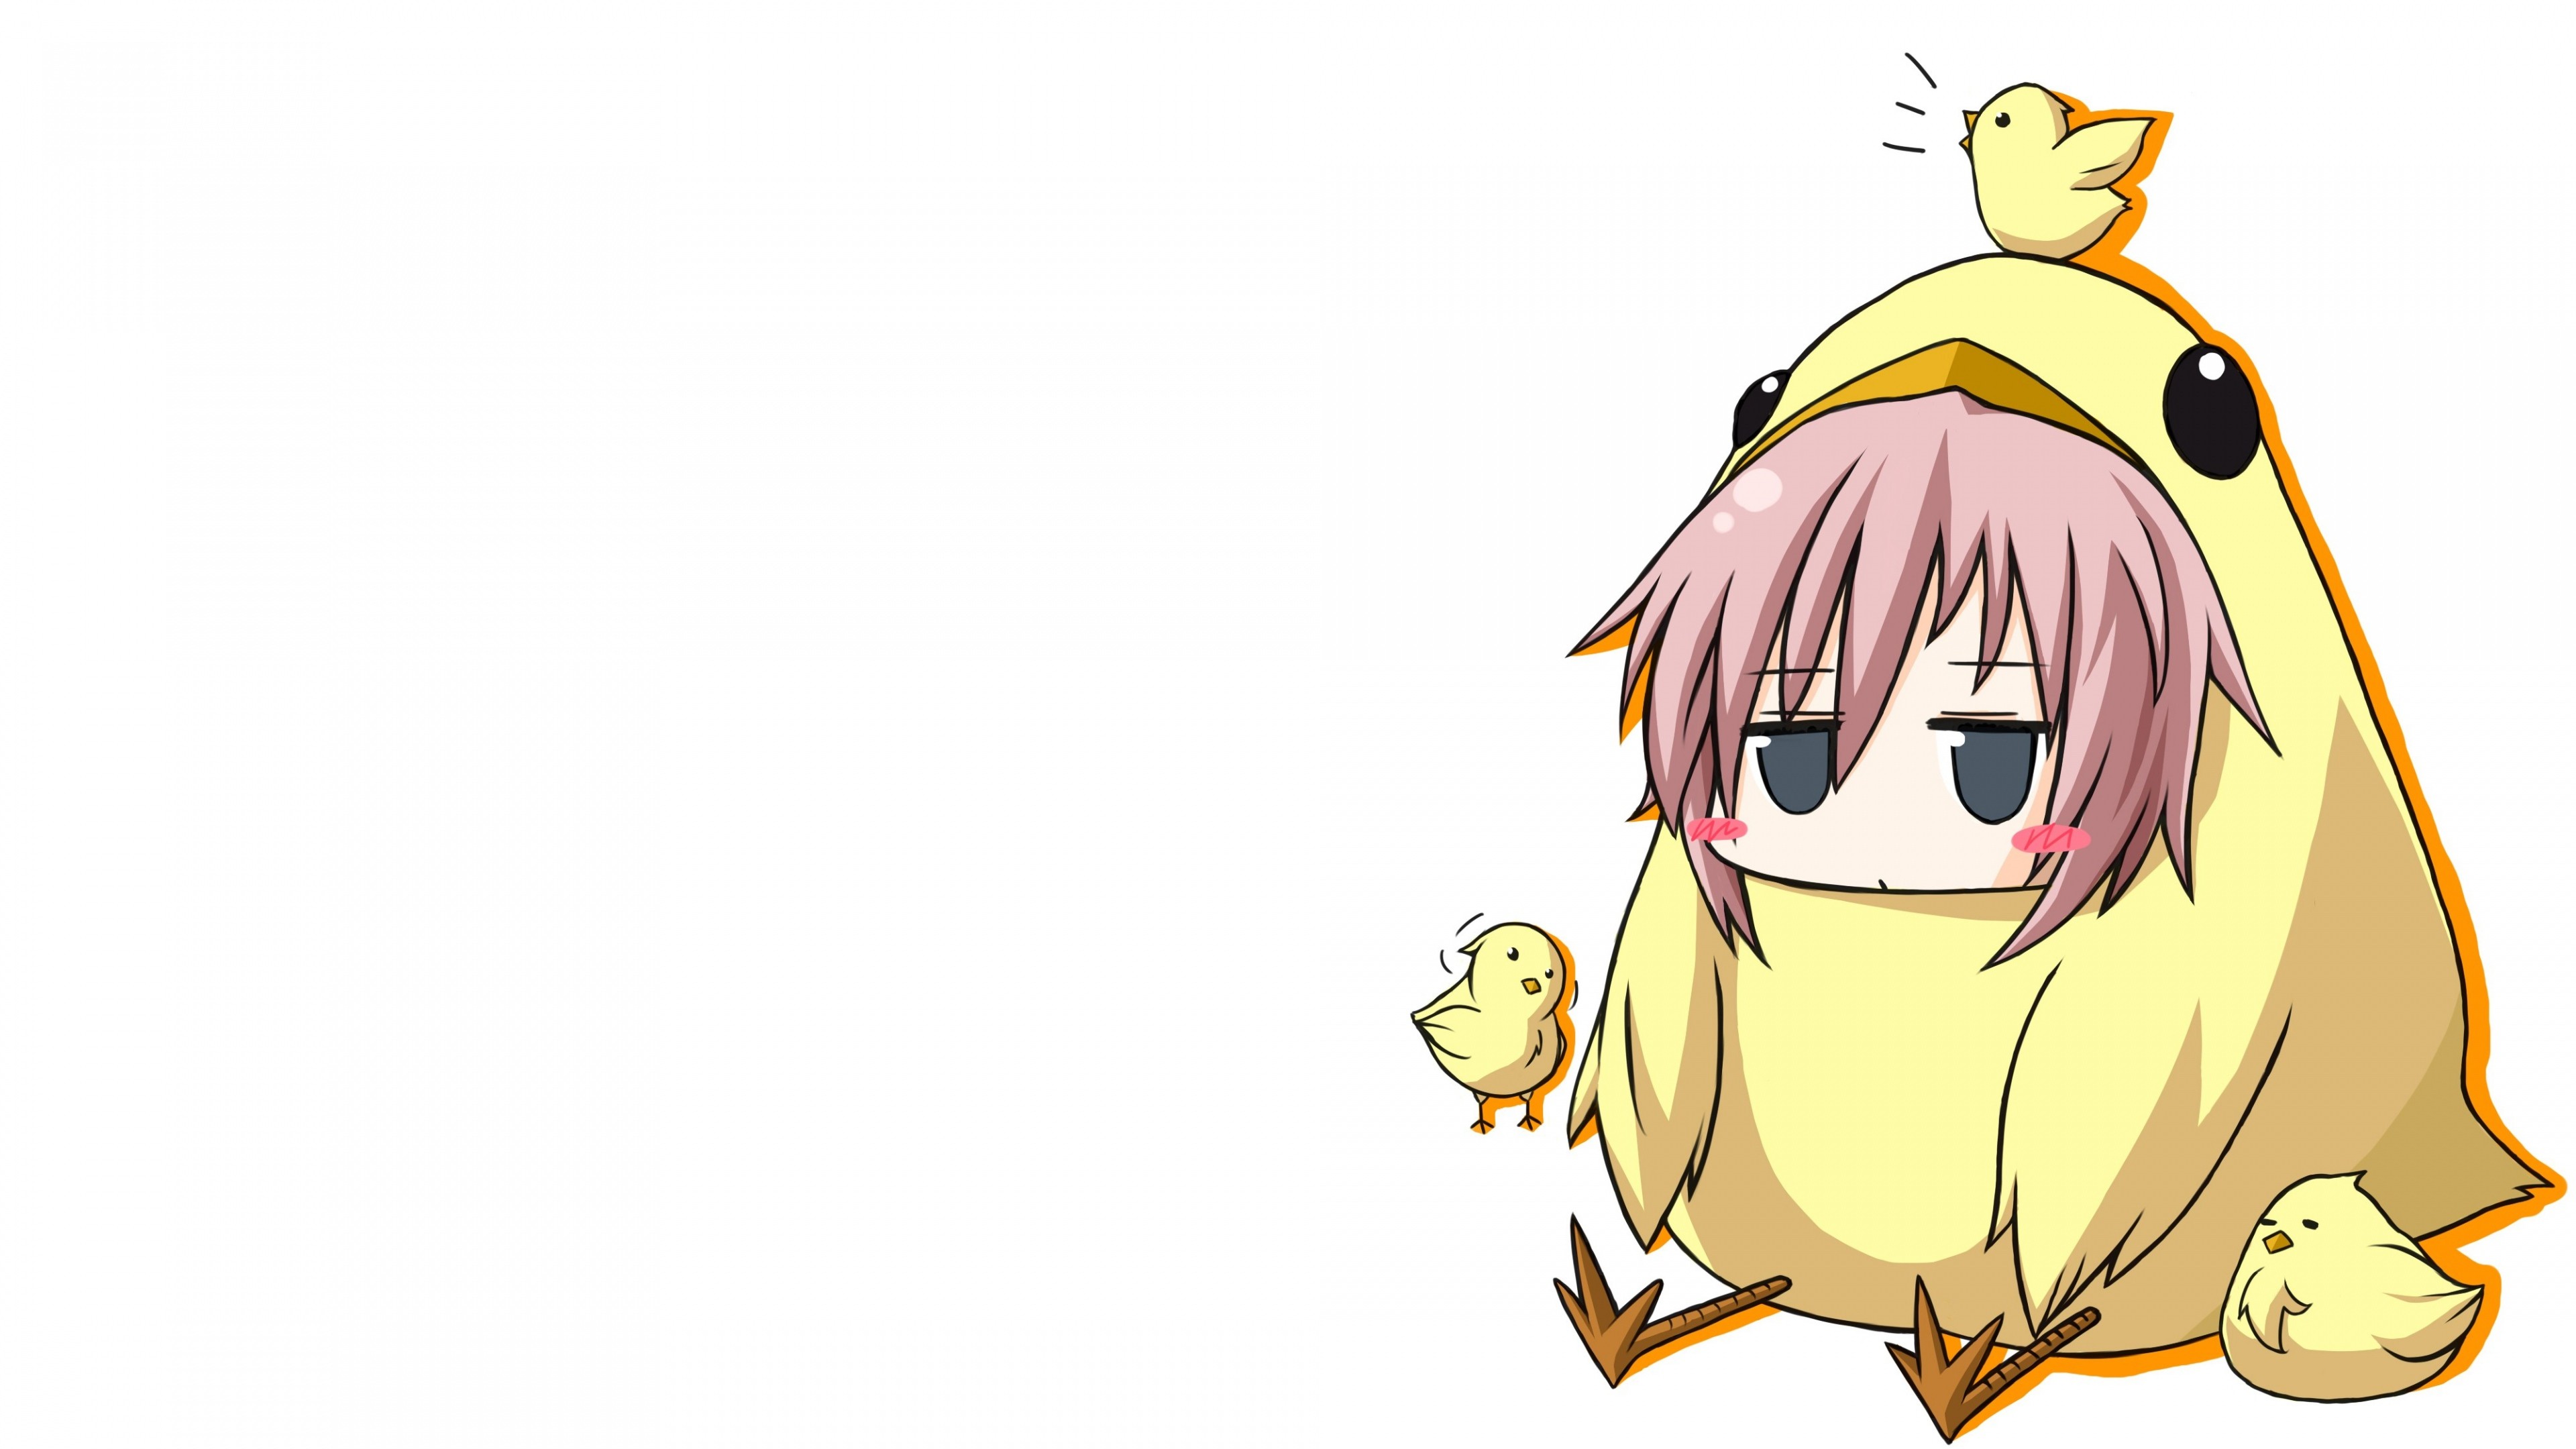 Anime 3840x2160 Chocobo Final Fantasy XIII Claire Farron anime fan art chickens anime girls white background video game girls video games pink hair